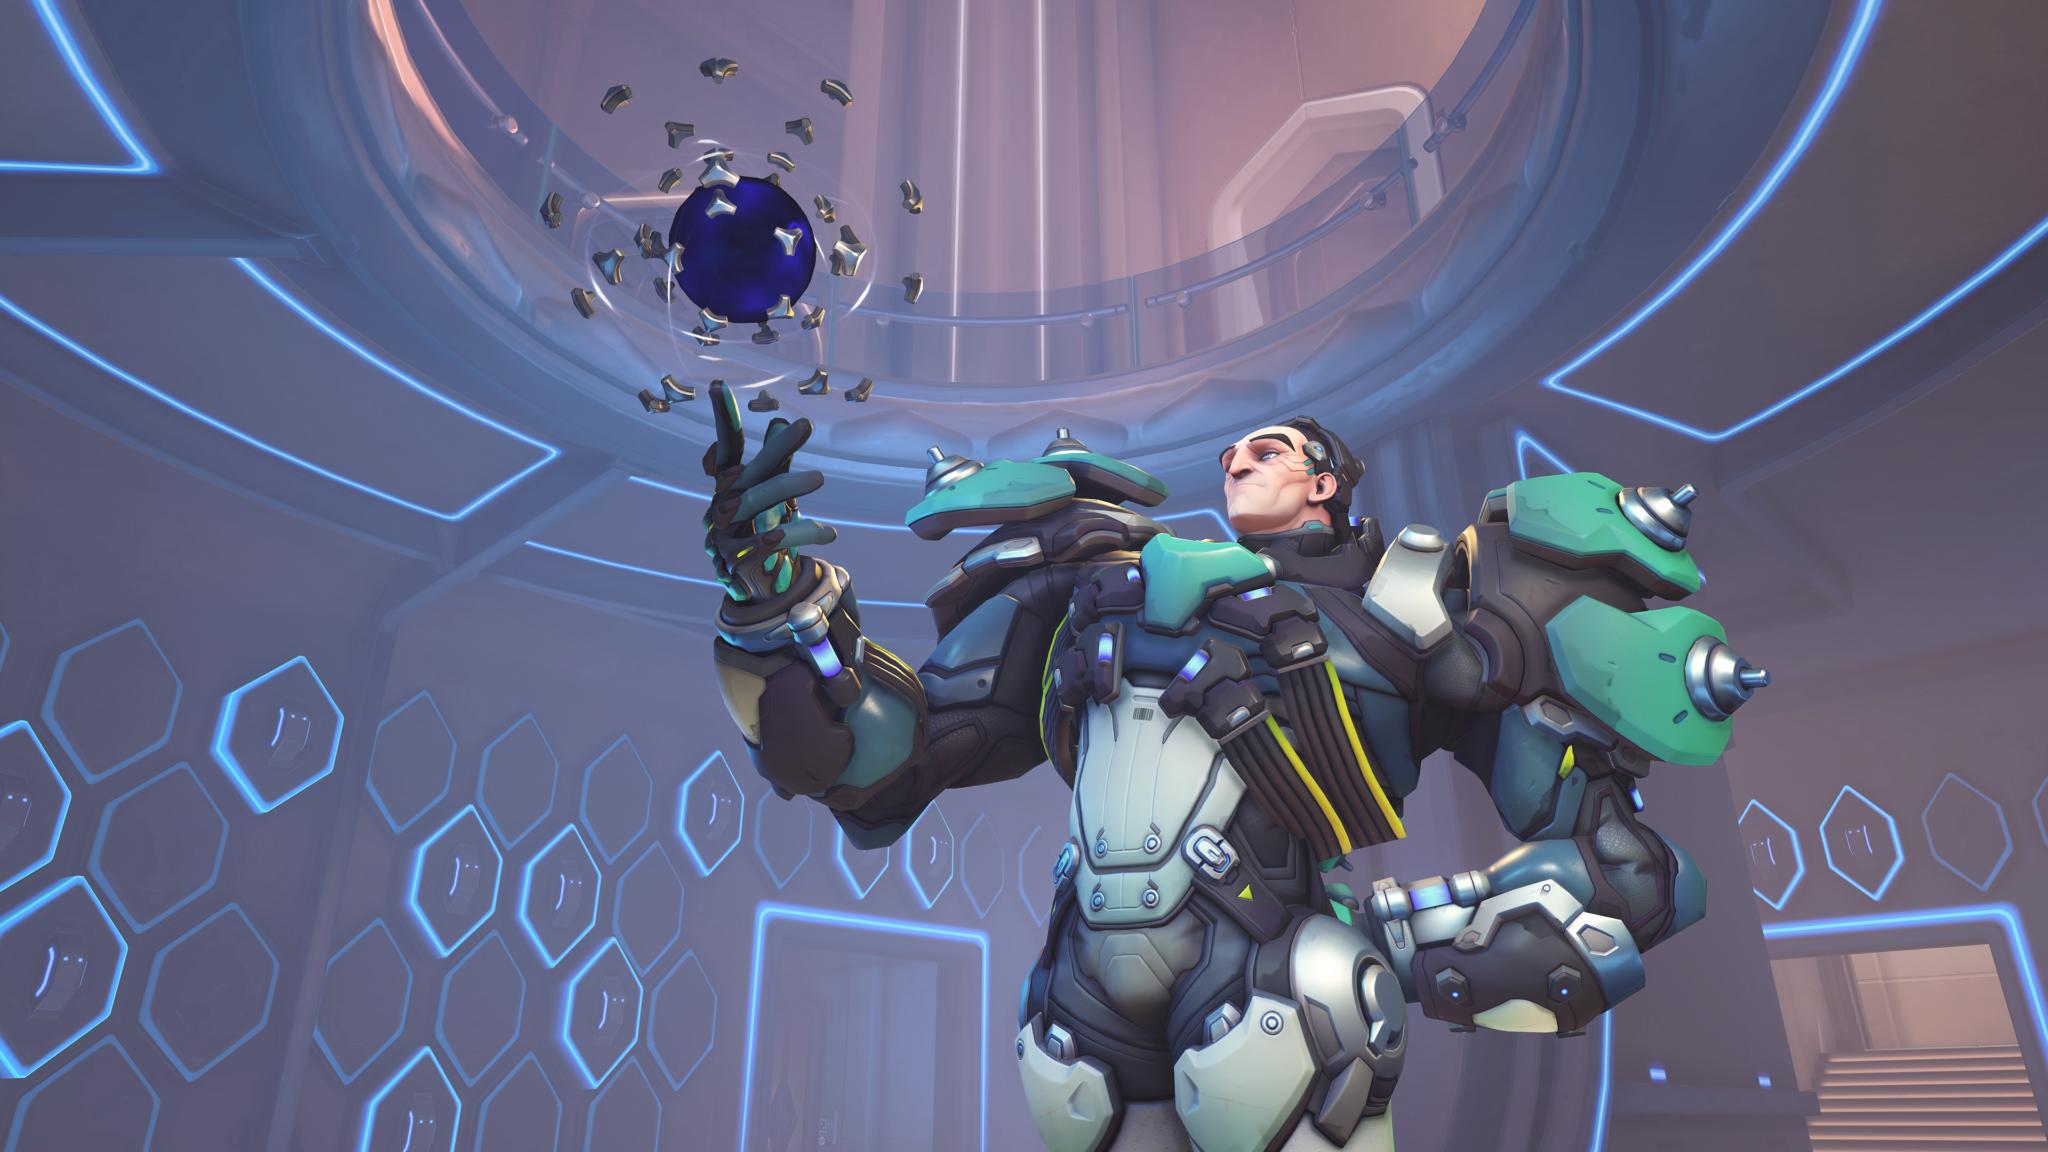 Sigma poses in Overwatch